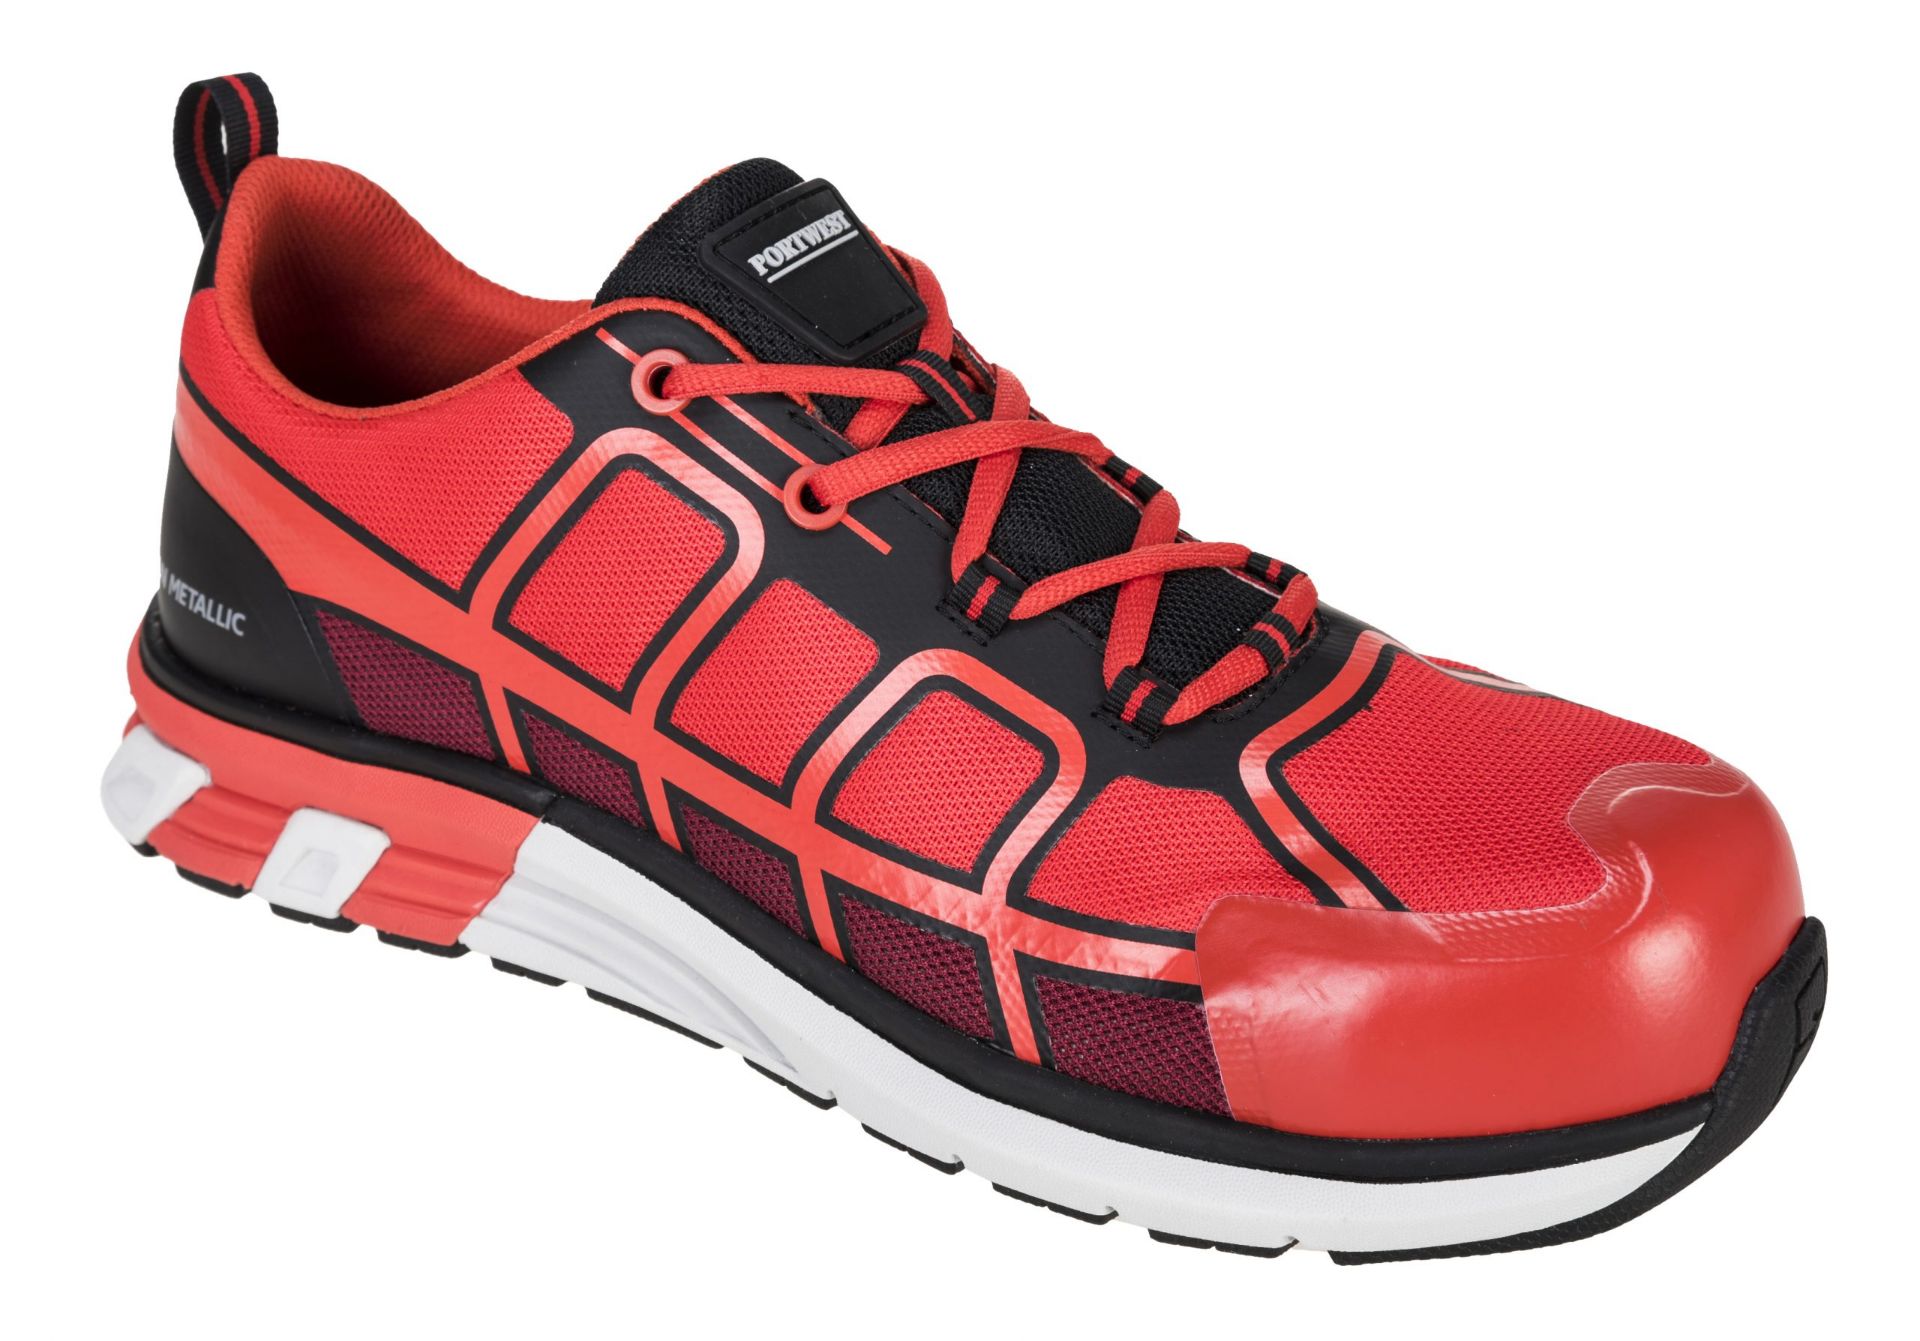 BRAND NEW PORTWEST FT17 OlymFlex Barcelona SBP AE Trainer RED/BLACK SIZE 7. RRP £45. (PW). (